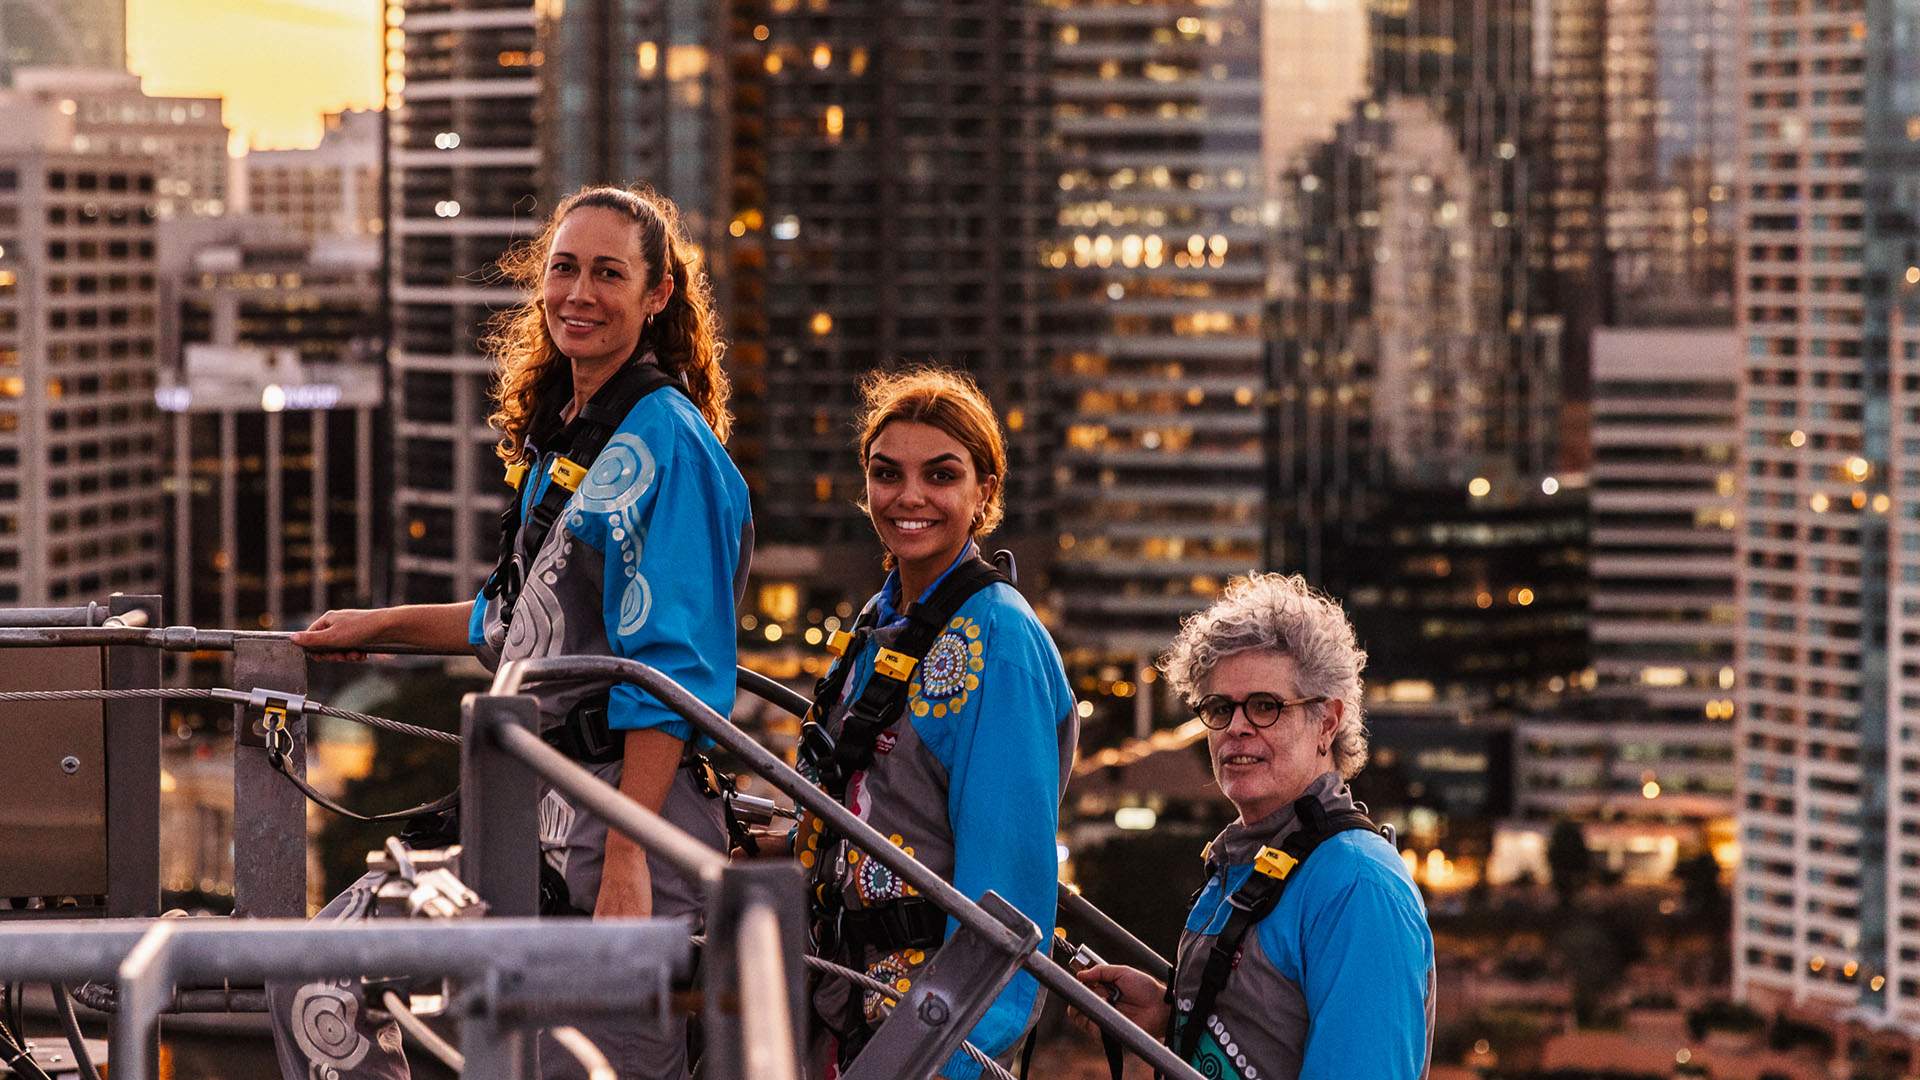 The New Indigenous Story Bridge Adventure Climb Will Give You a First Nations (and Sky-High) Perspective on Brisbane